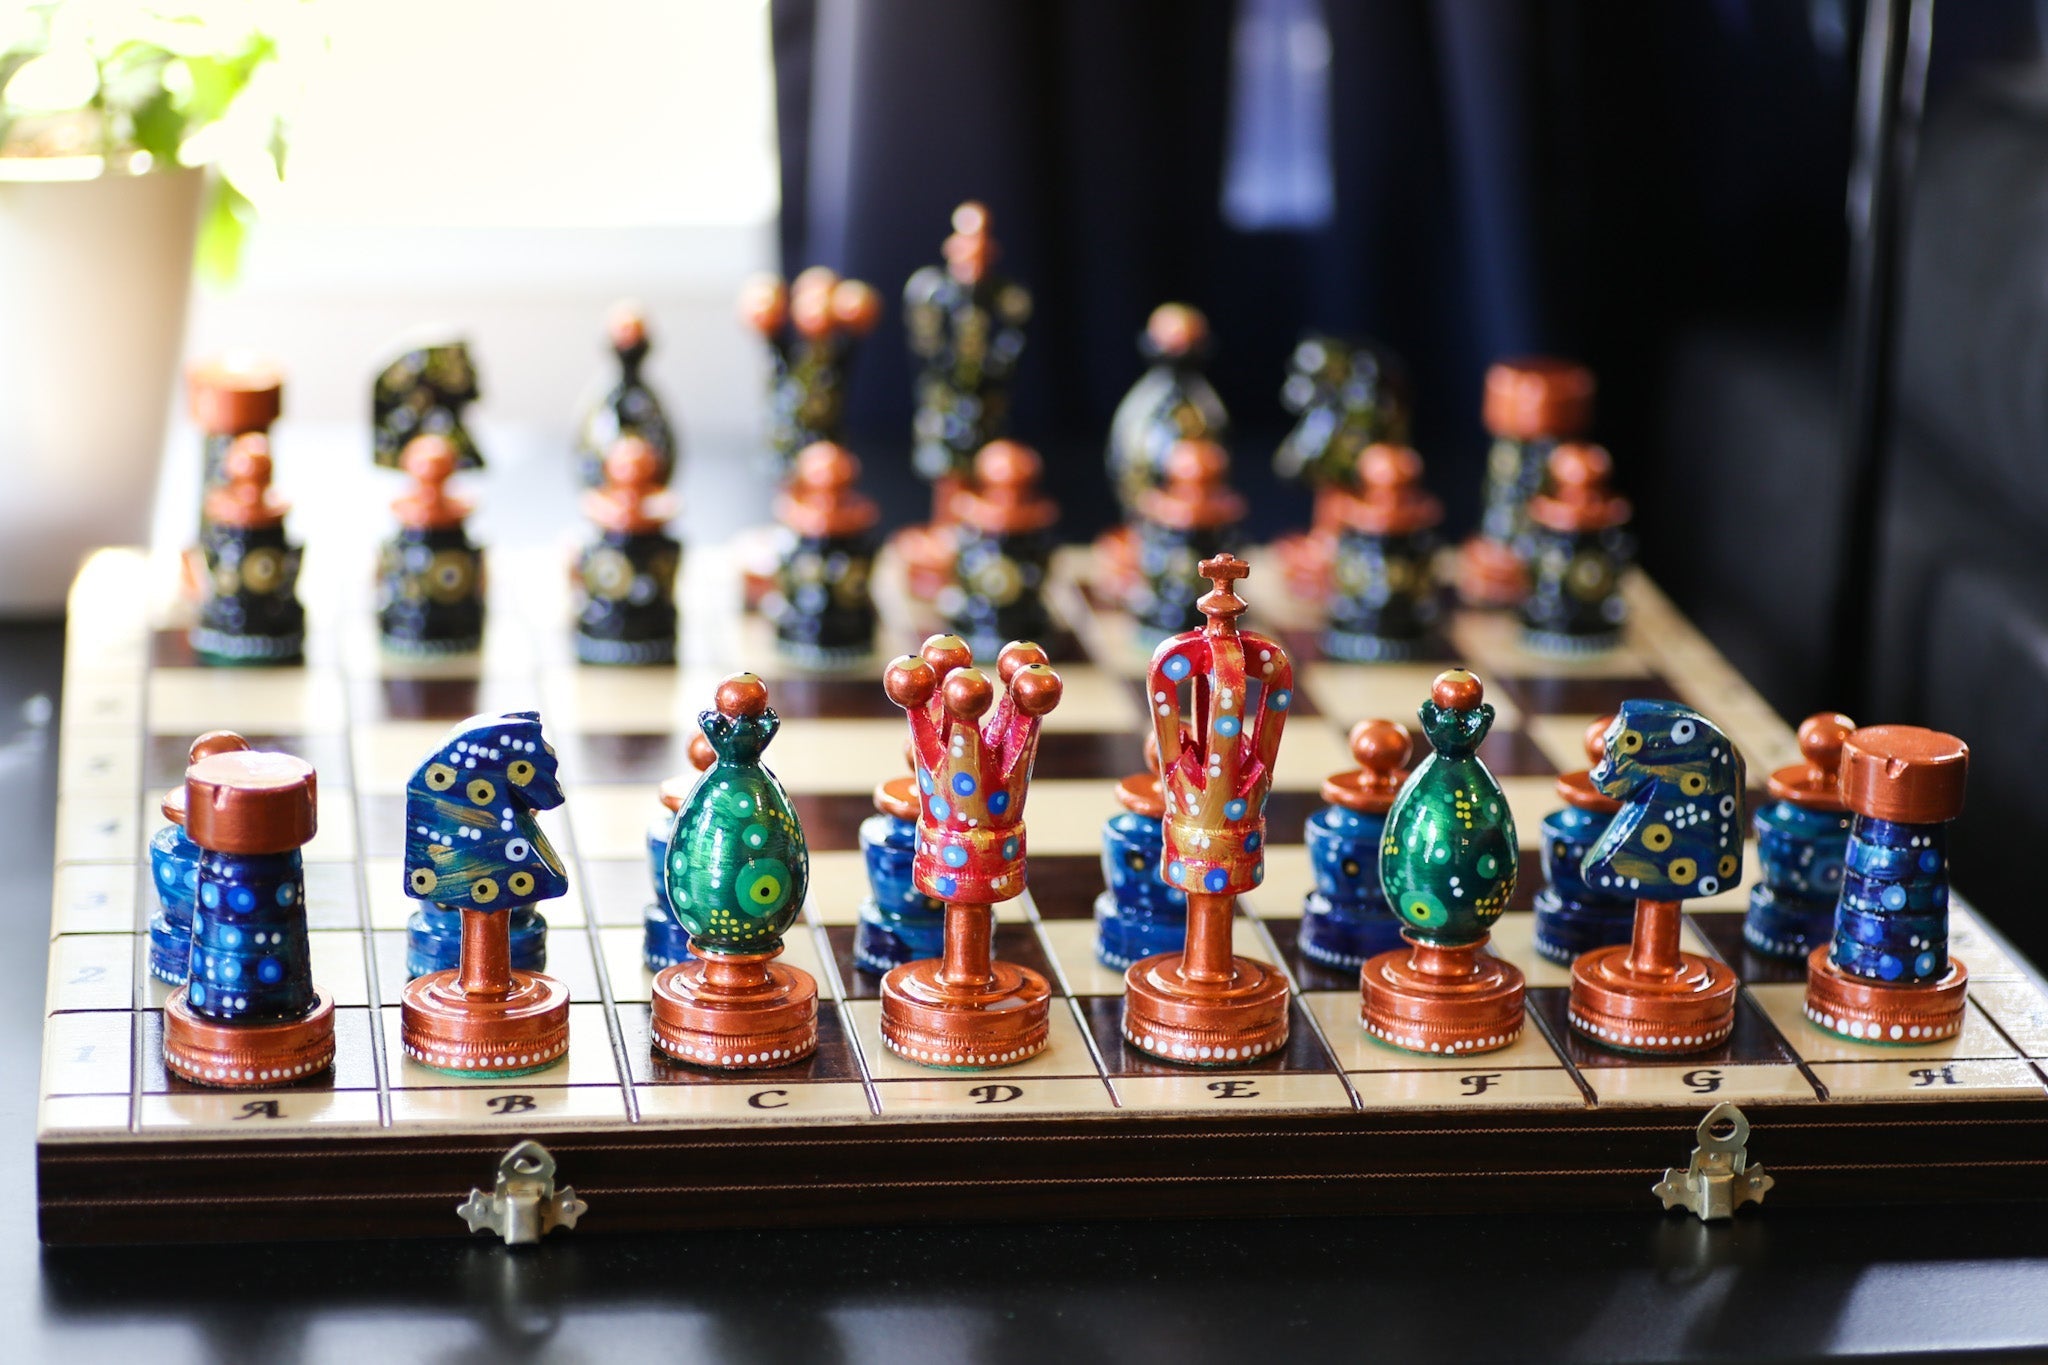 The Surefooted Journeyman - Sydney Gruber Painted 20" Large King's Inlaid Chess Set #10 - Chess Set - Chess-House